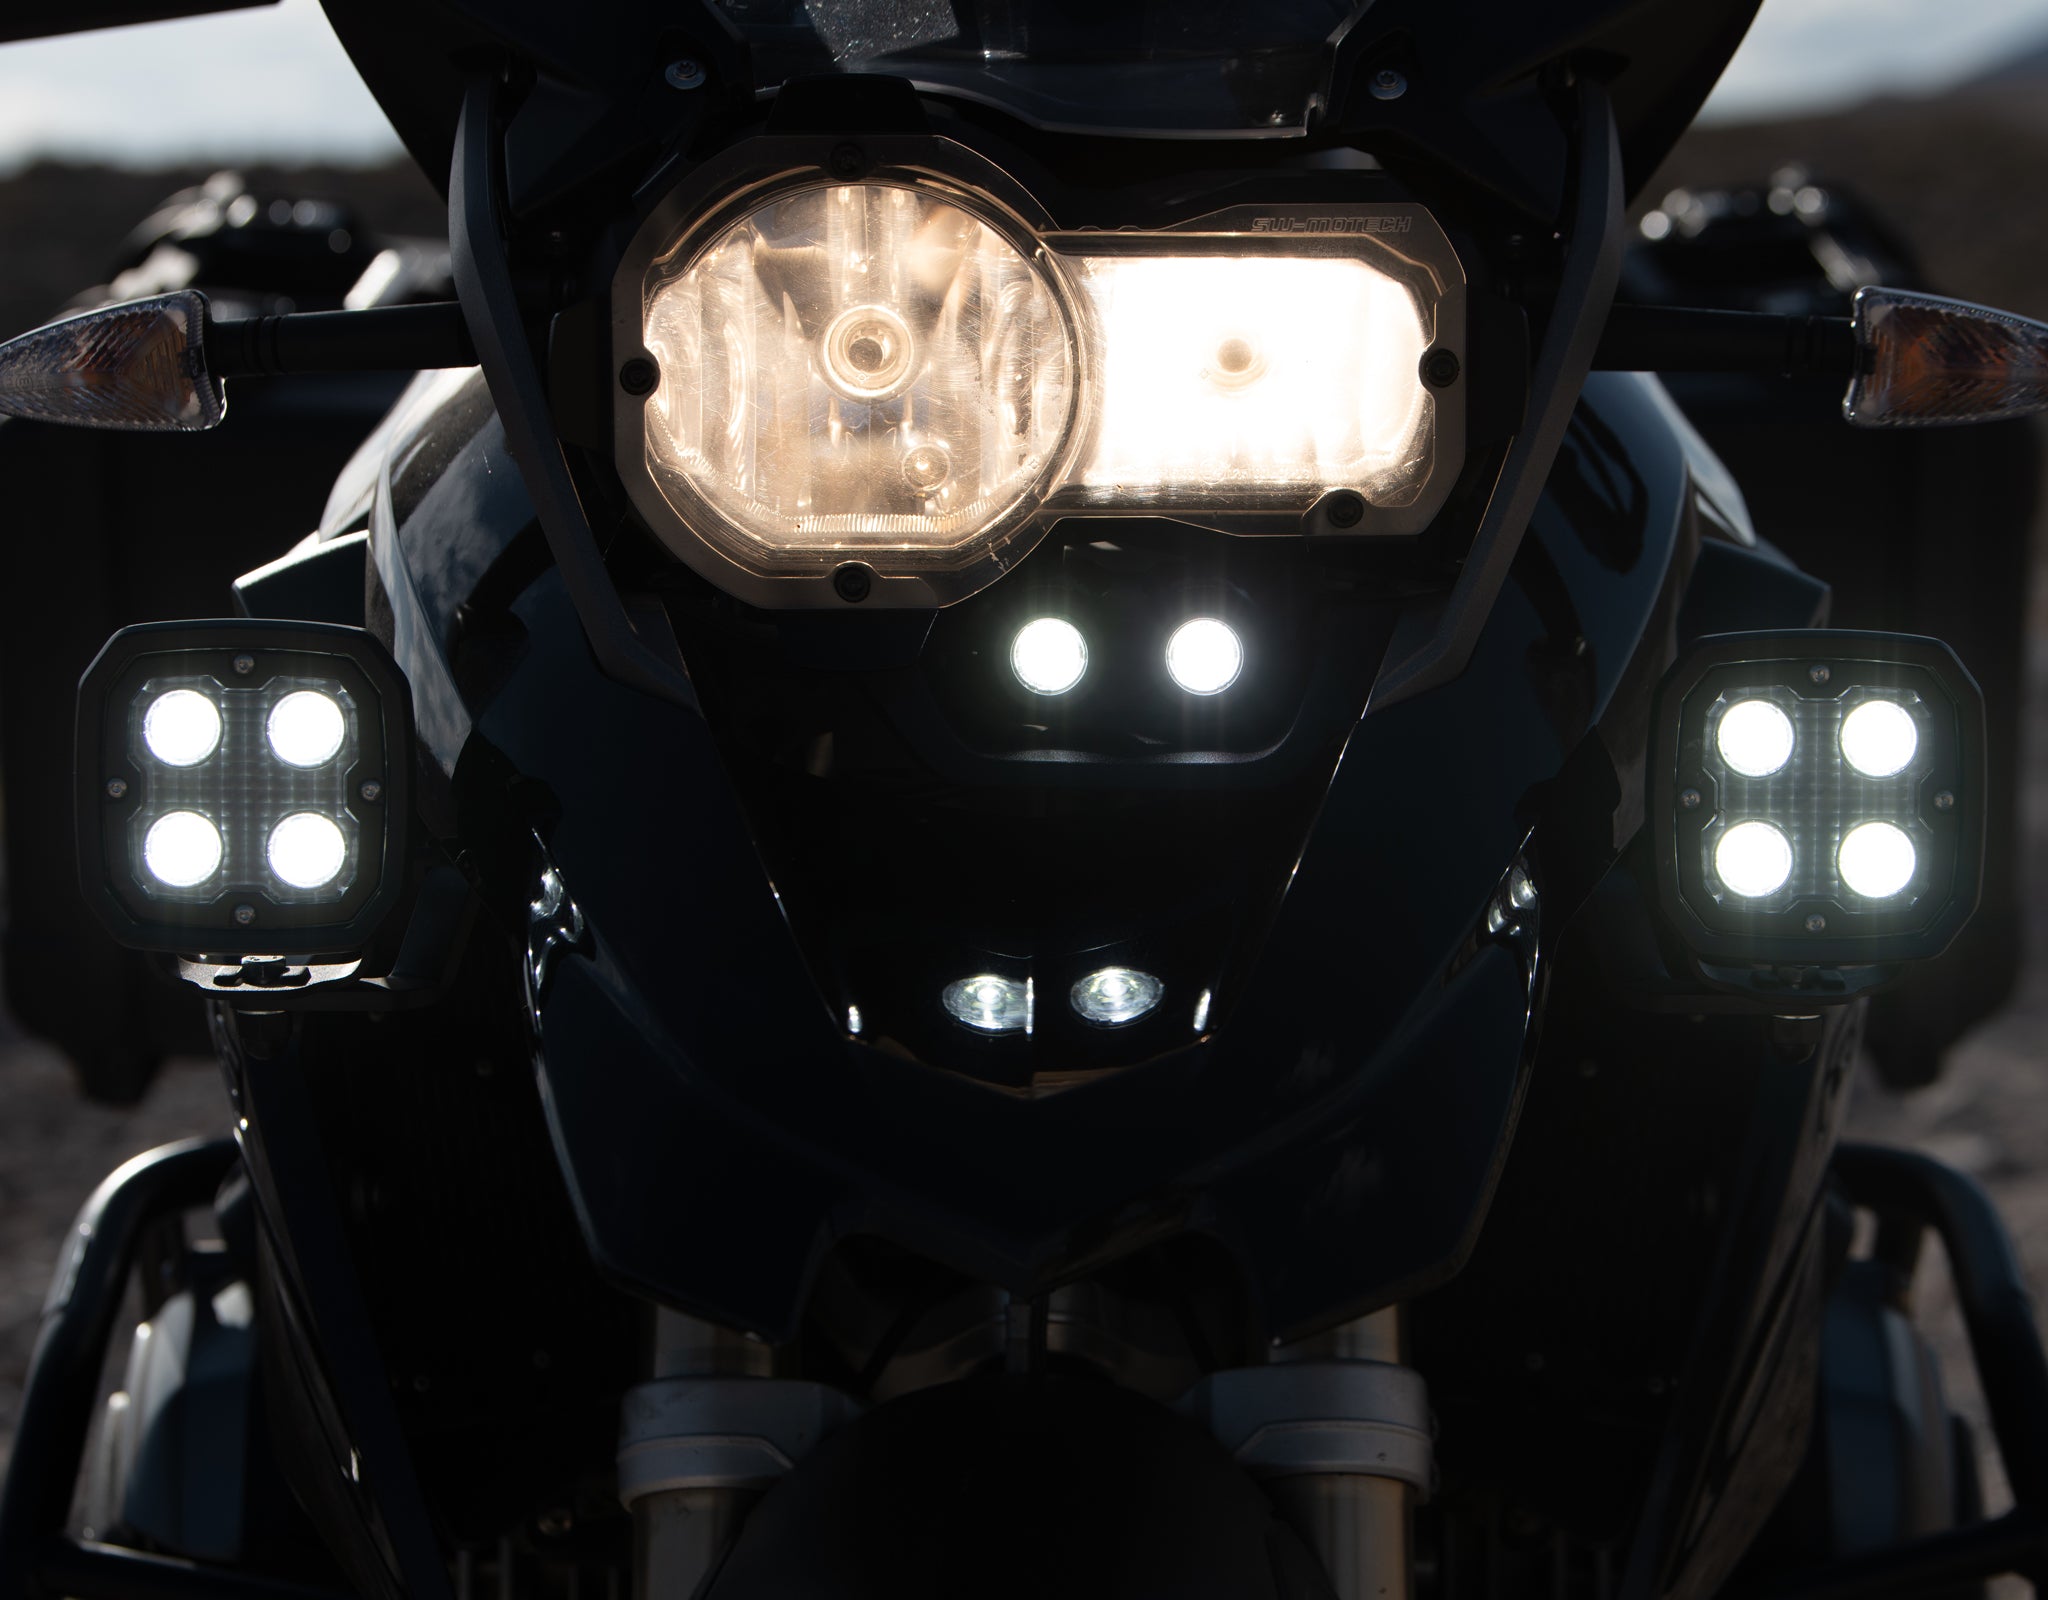 DM Light Kit tucked underneath the headlight using the BMW R1200GS Vehicle-Specific Light Mount